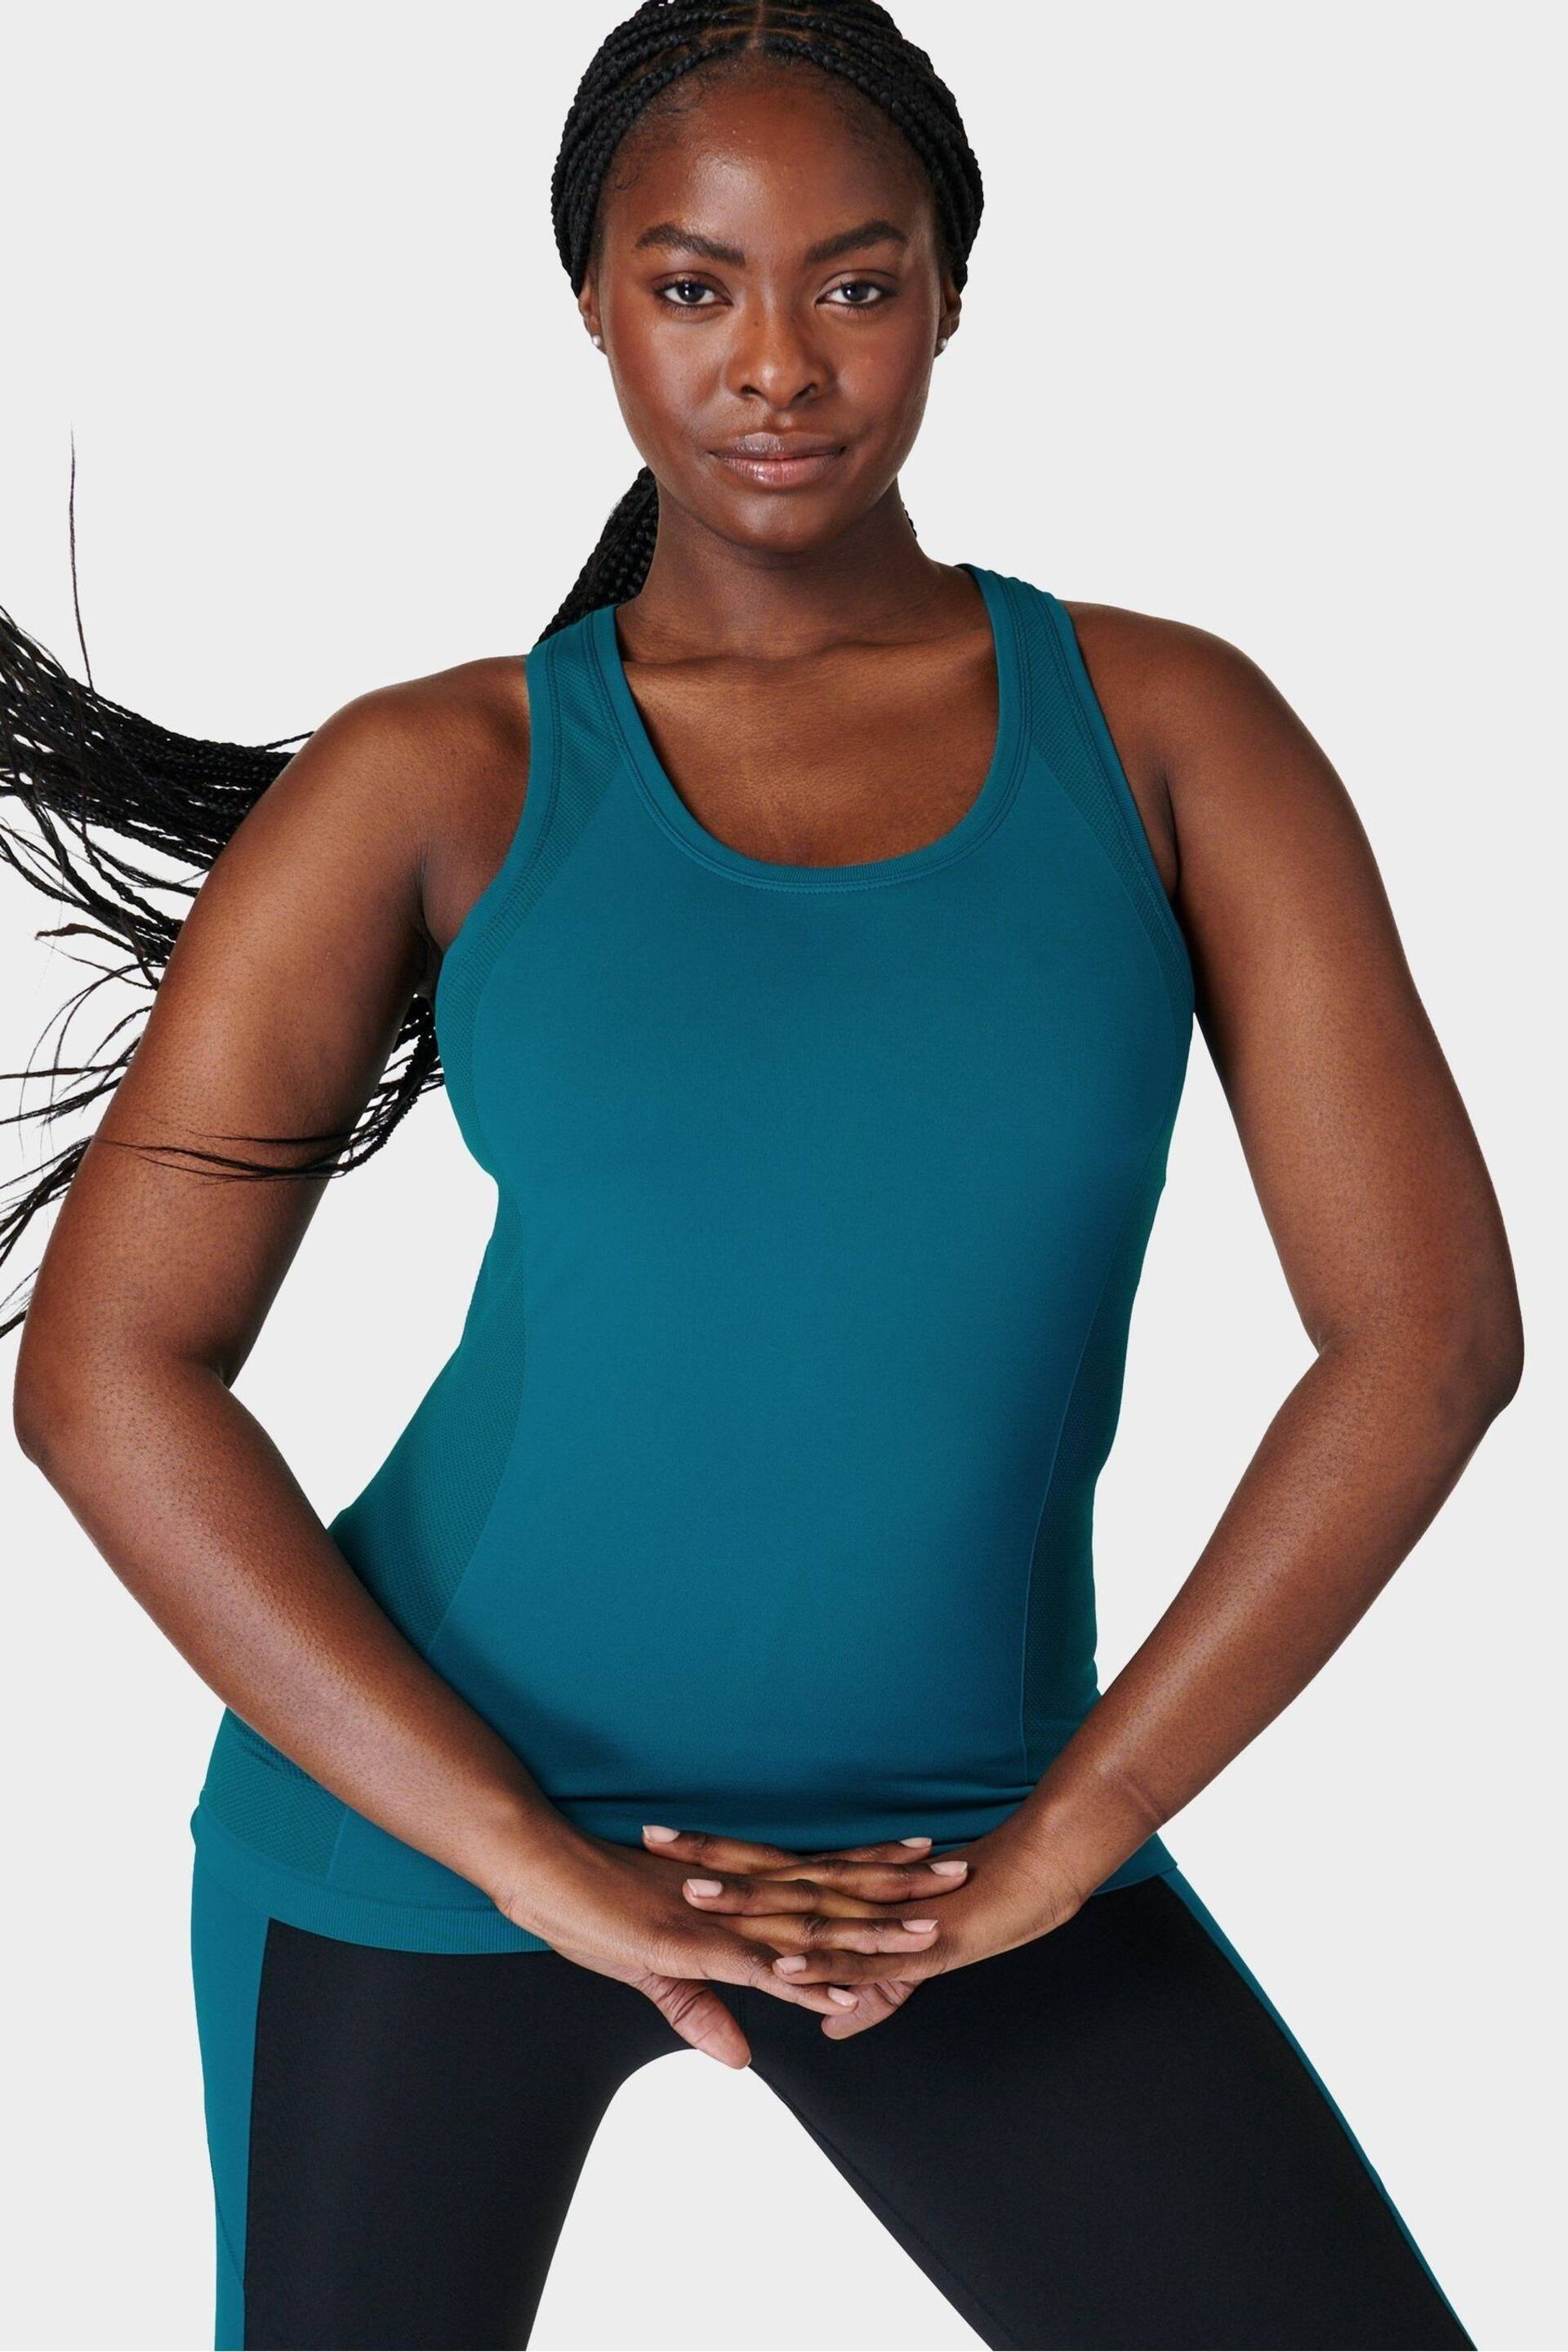 Sweaty Betty Reef Teal Blue Athlete Seamless Workout Tank Top - Image 2 of 7